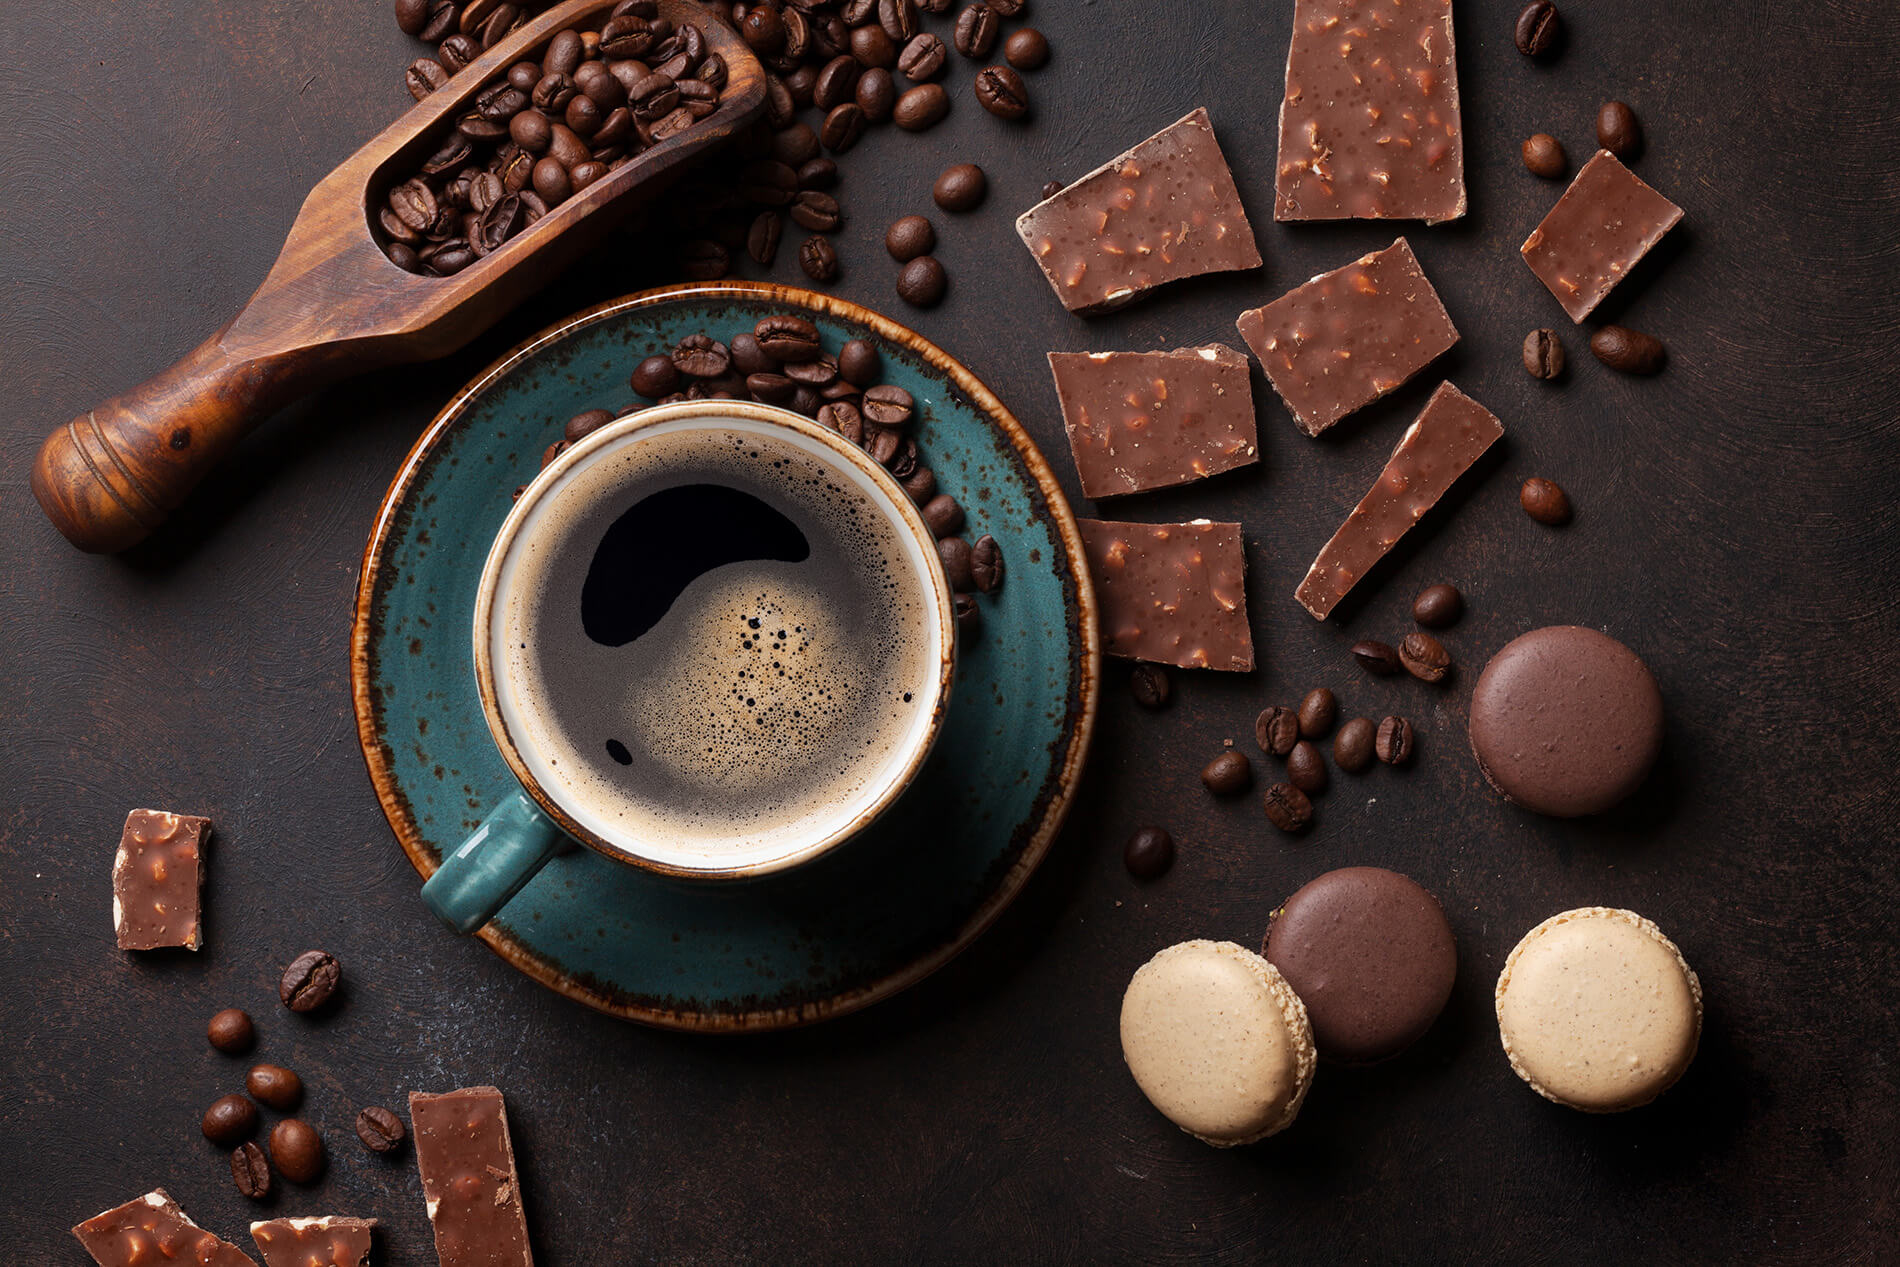 Coffee and chocolate at risk from climate change